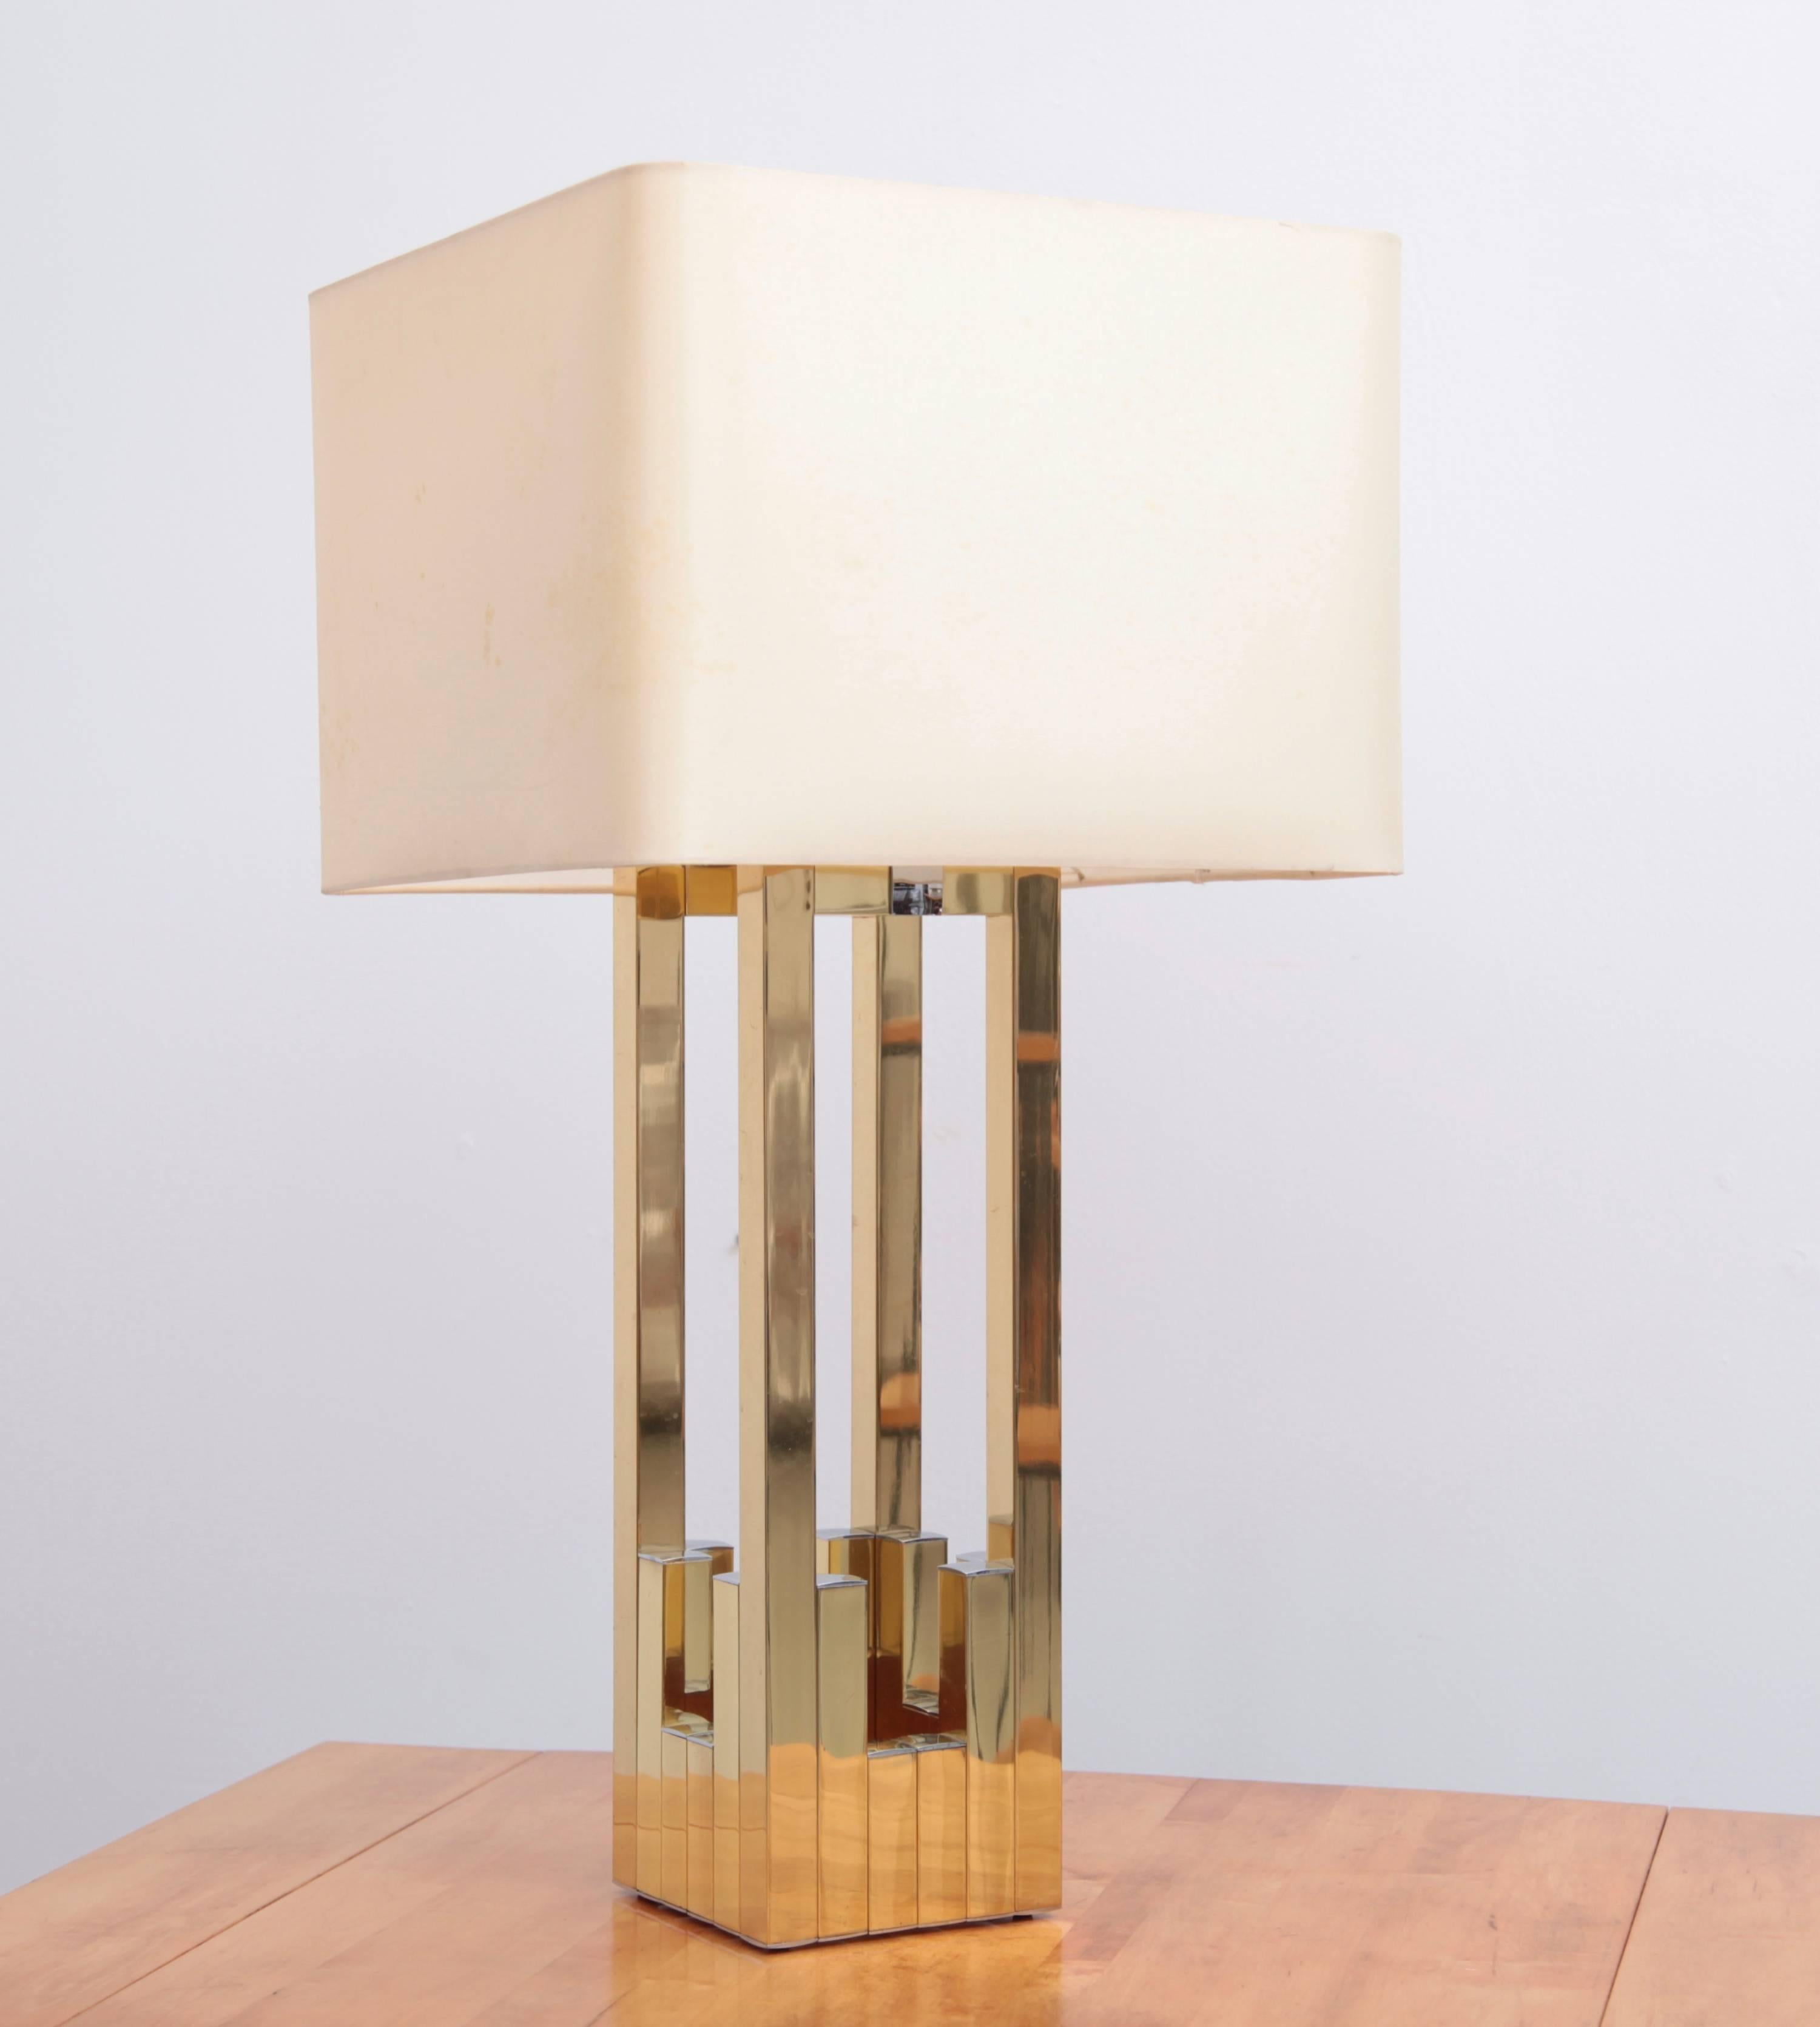 willy rizzo lamp